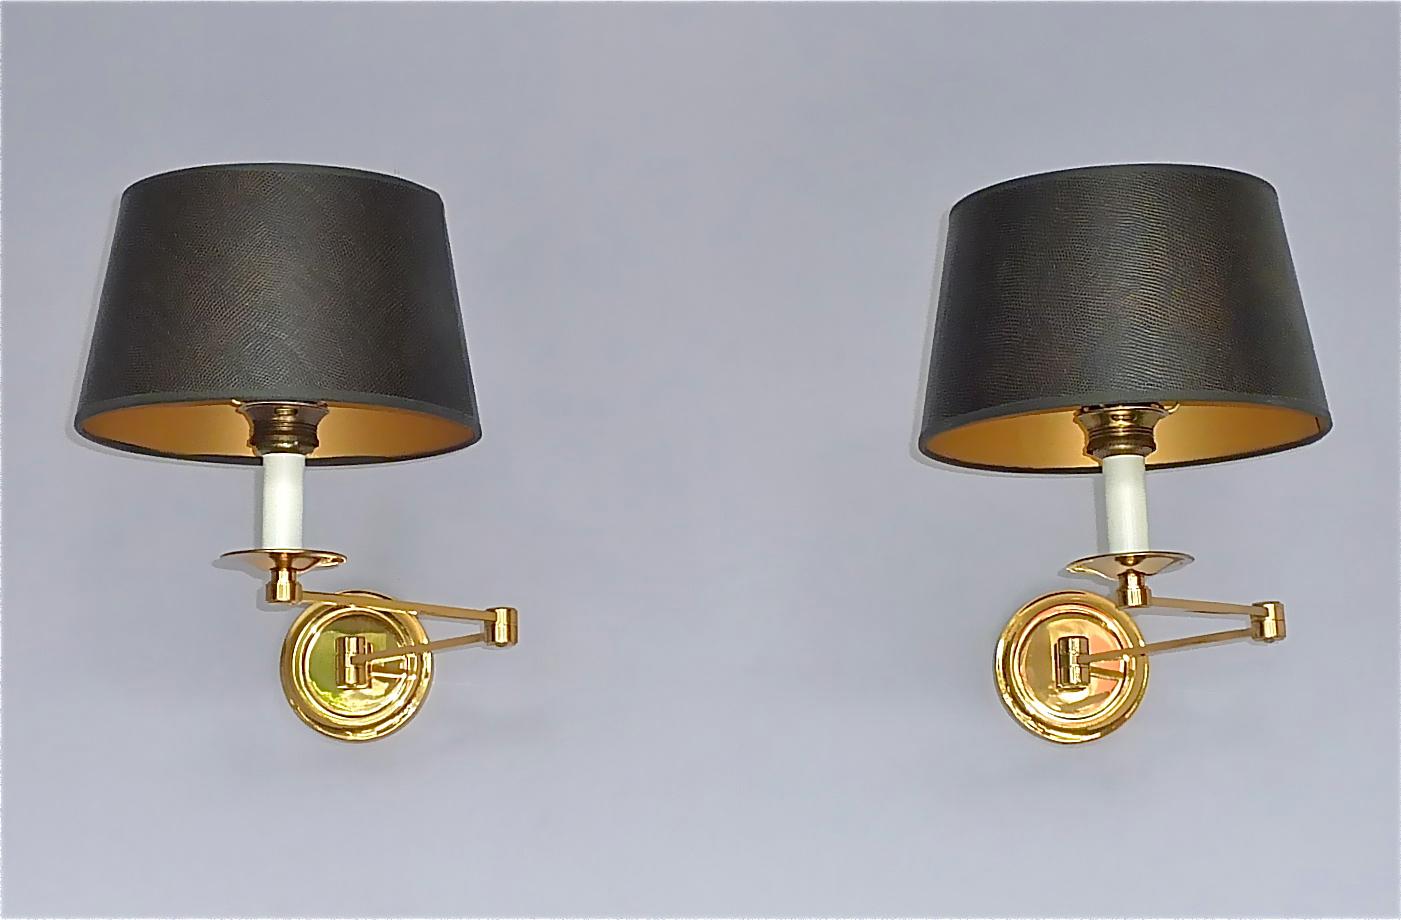 Exclusive rare pair of gilt brass Maison Bagues swing arm sconces, Paris, France circa 1960s to 1970s. The beautiful sconces are documented in the sales catalog and additionally one sconce is signed on reverse of one backplate with the Bagues Paris